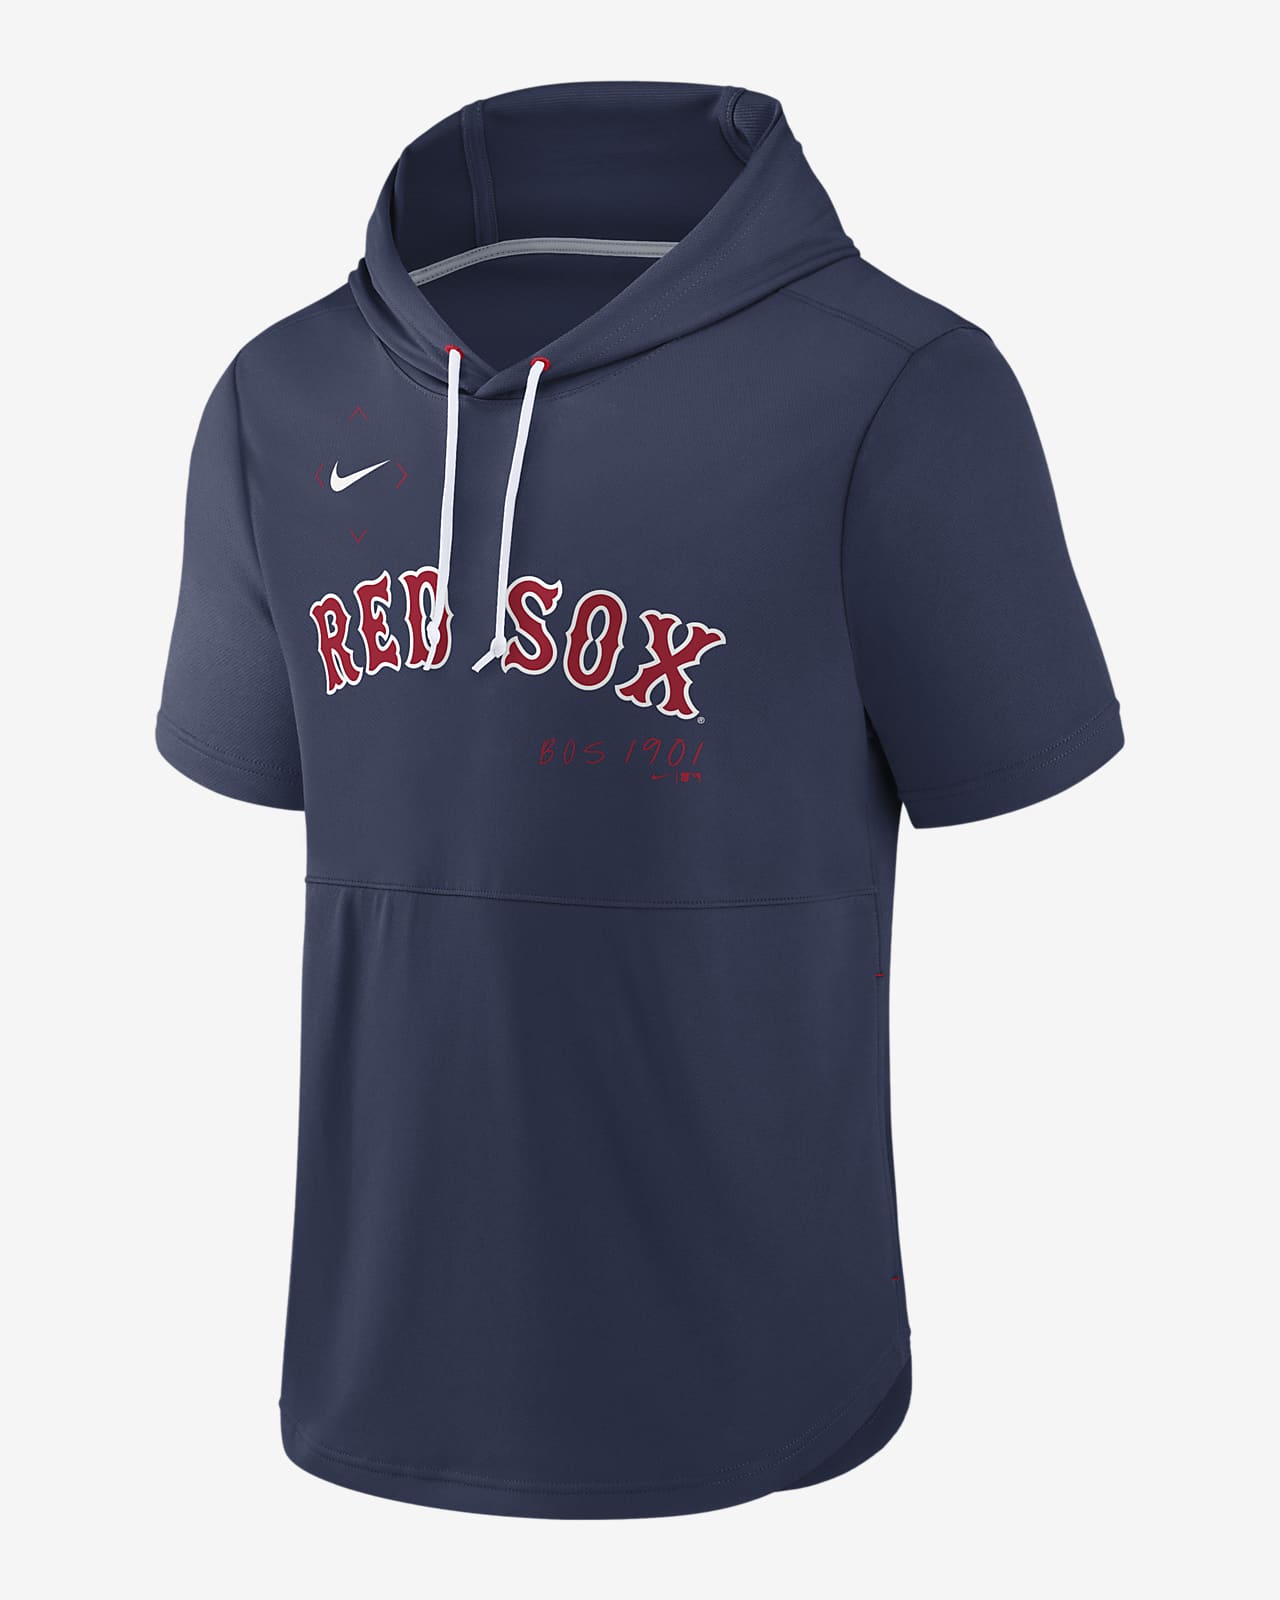 Boston Red Sox Pullover Hoodie